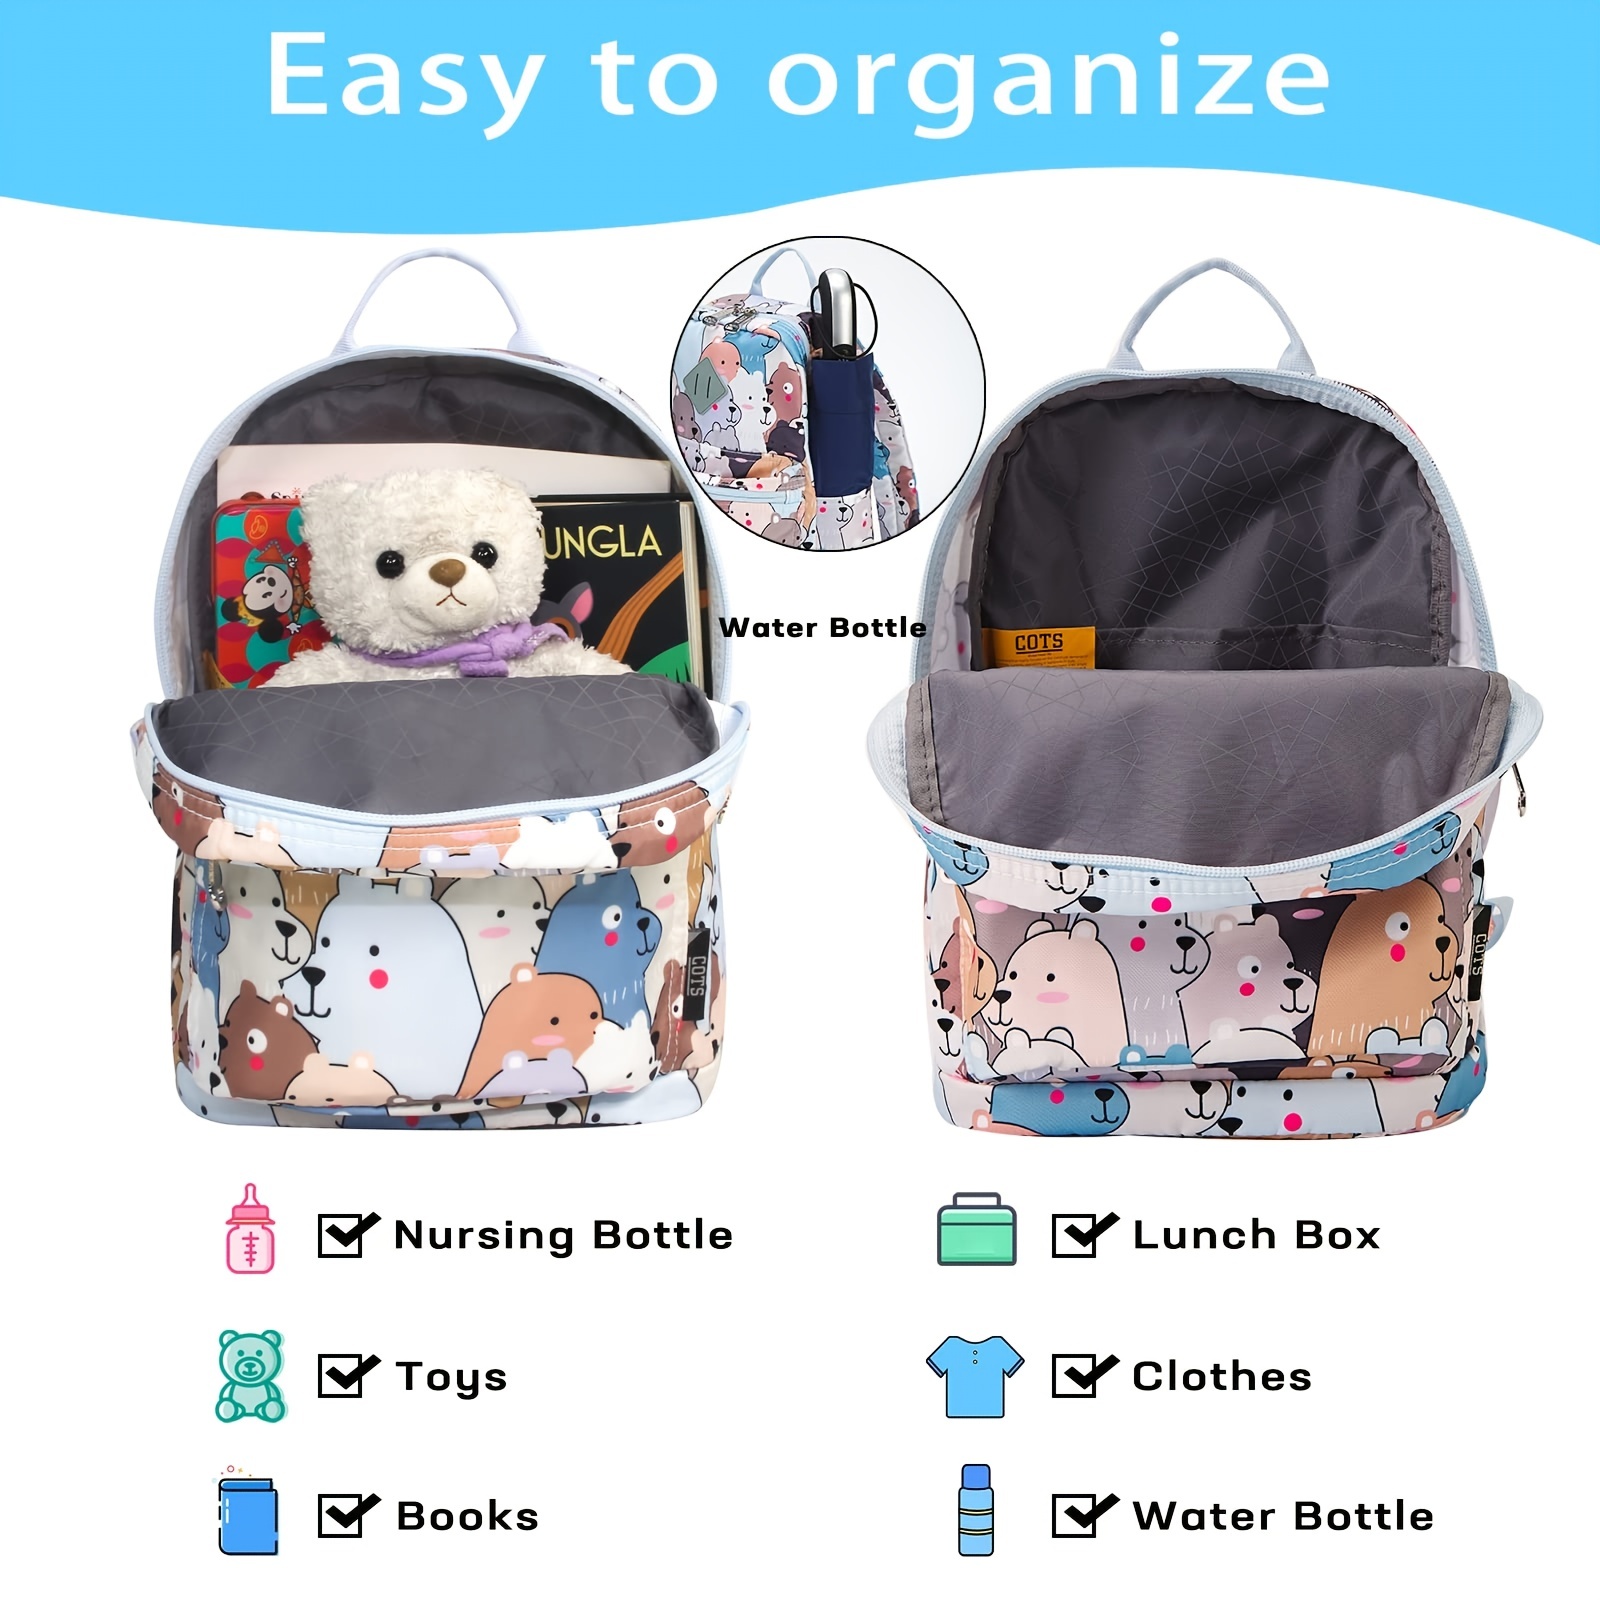 Kids Backpacks, Water Bottles & Lunch Boxes for School